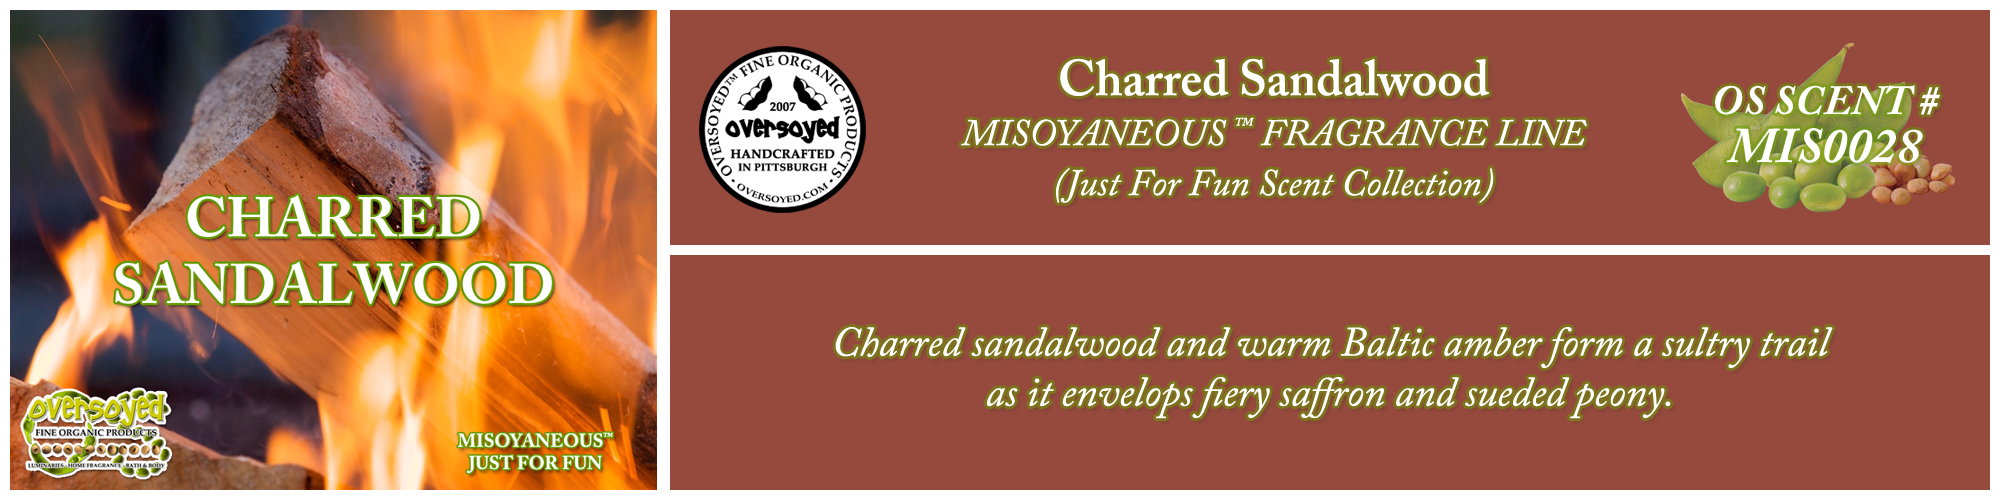 Charred Sandalwood Handcrafted Products Collection